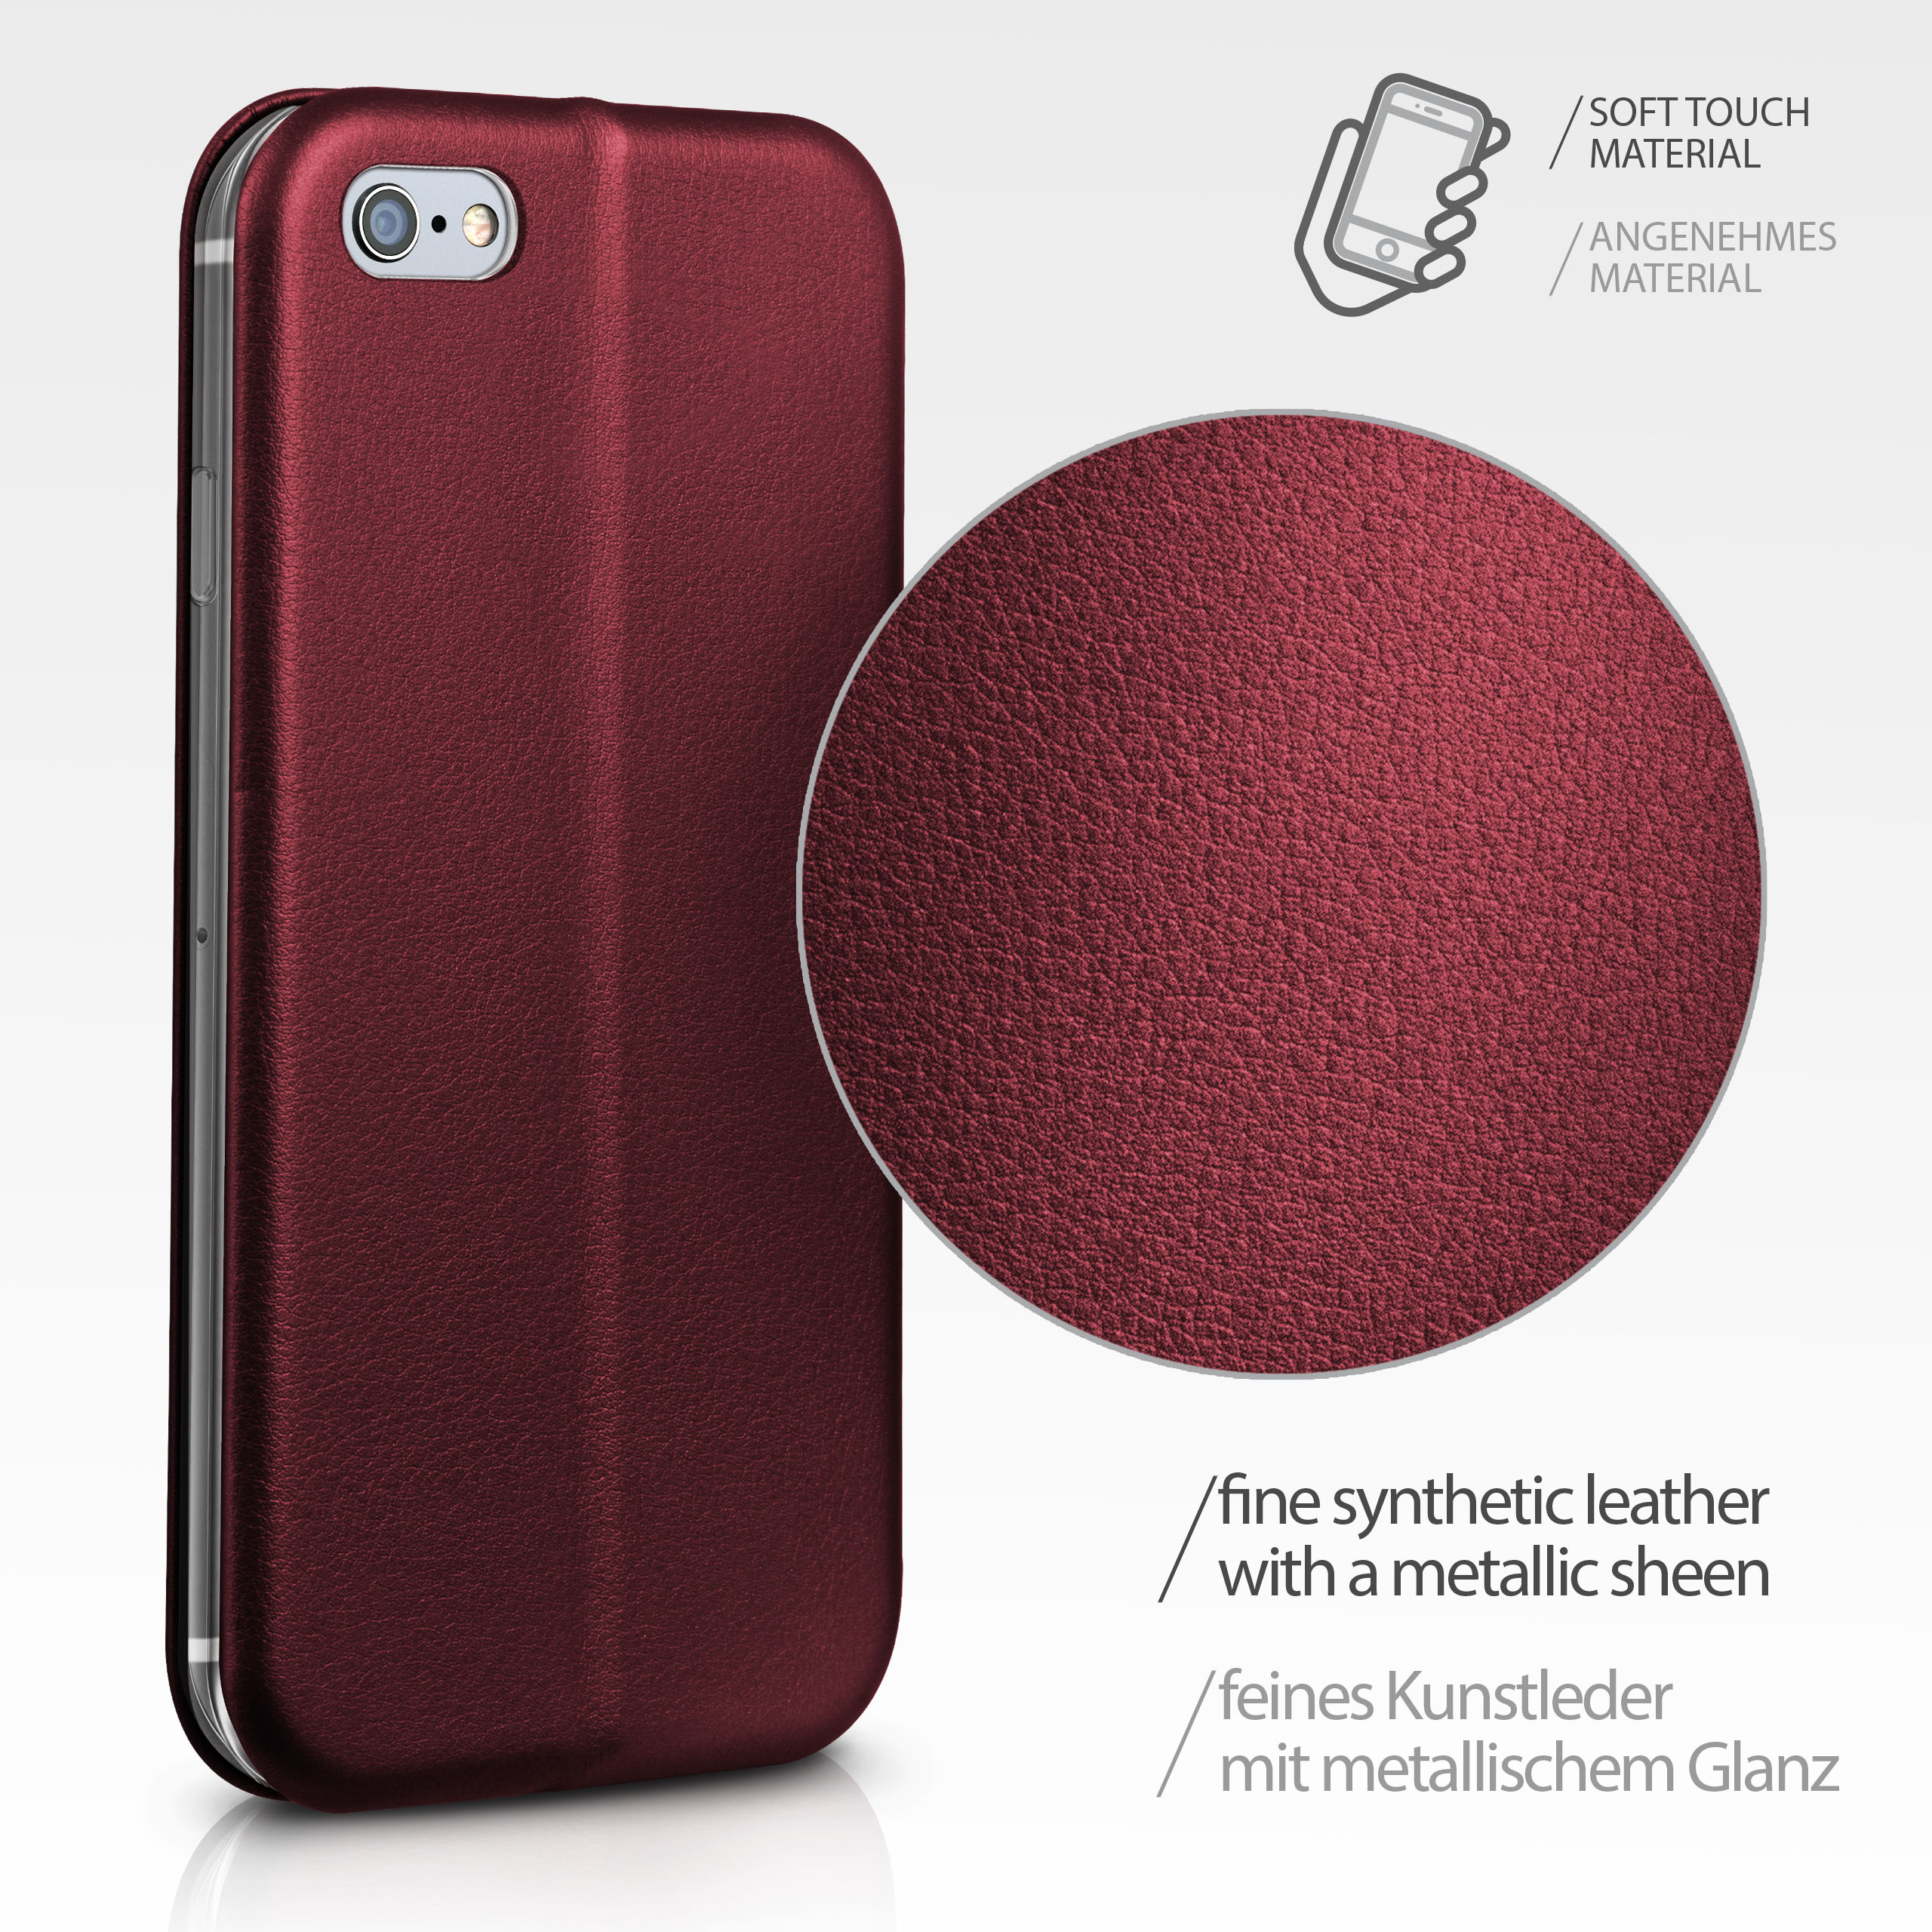 ONEFLOW Business Case, Flip Cover, iPhone 6s 6, iPhone Apple, Burgund - Red 